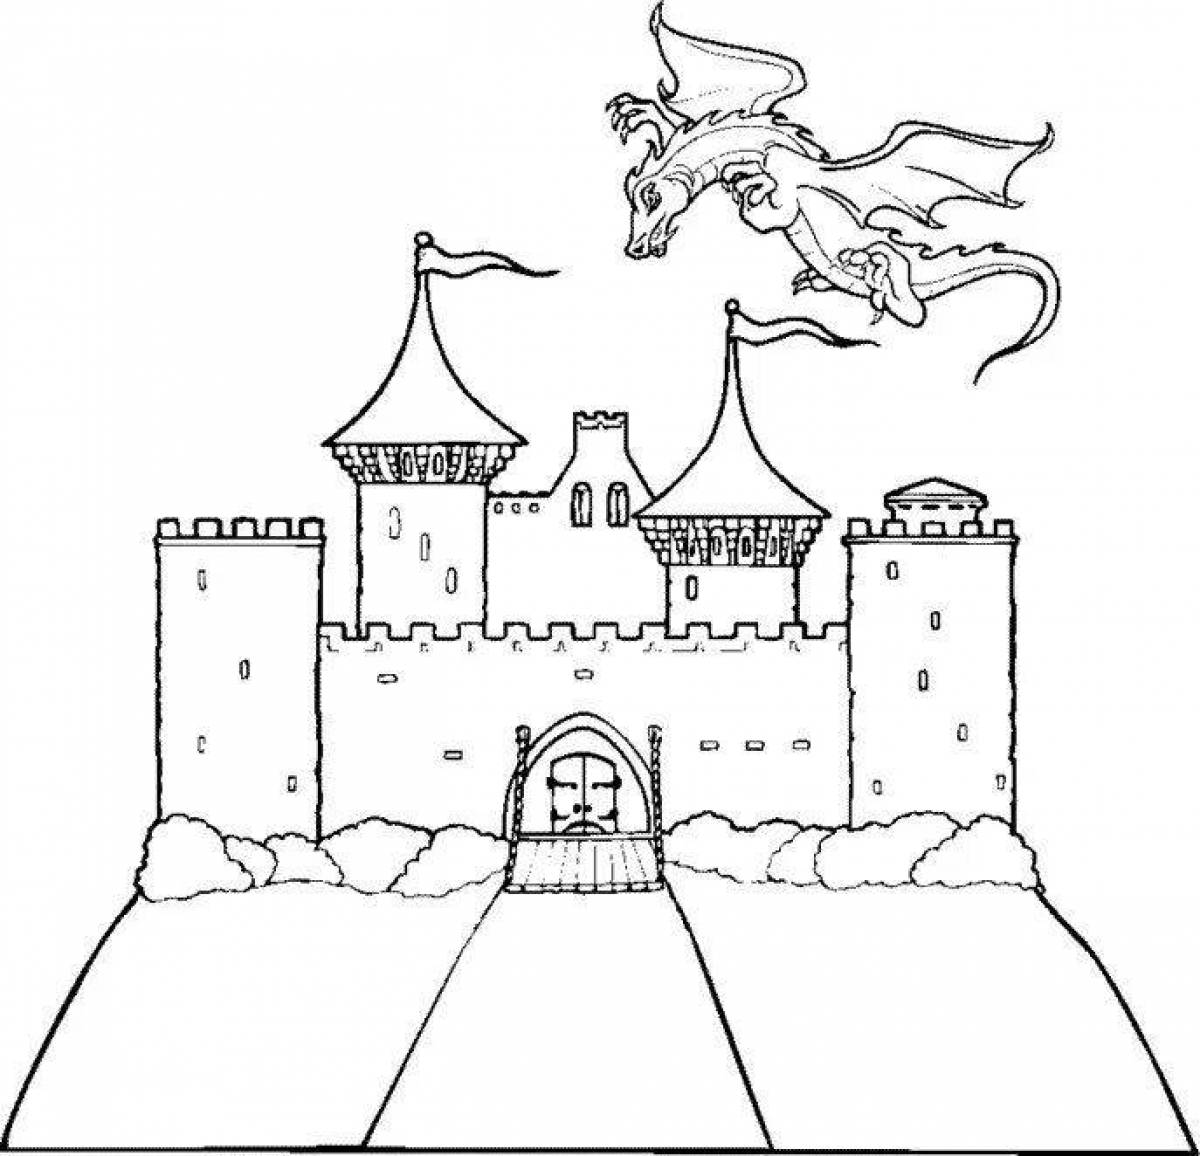 Coloring book shining knight's castle